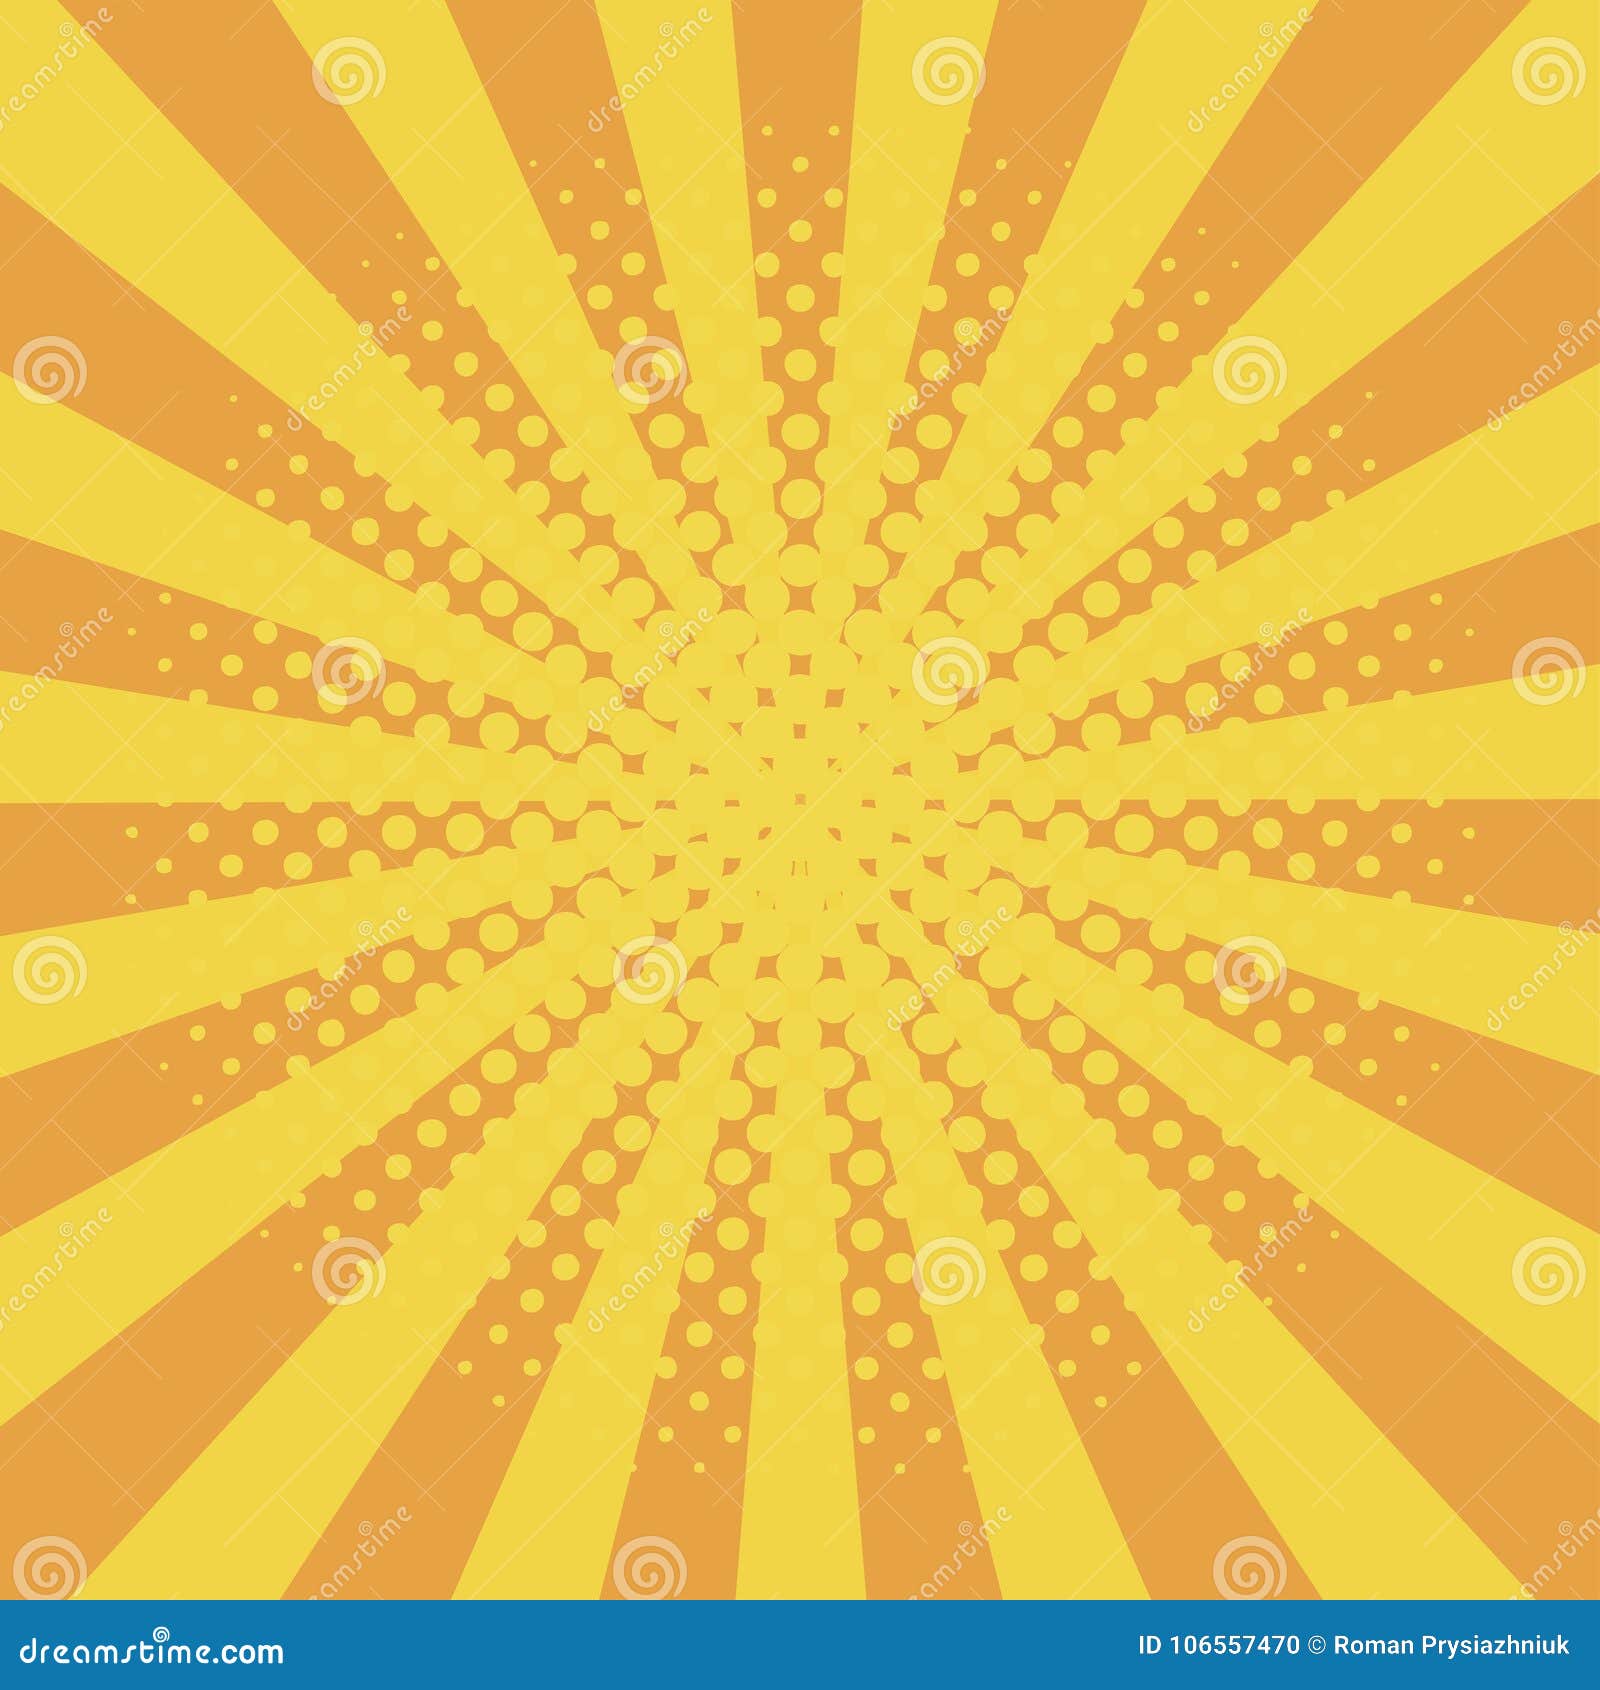 comic background with halftone effect and sunburst. comic book s with dots and sunray. yellow starburst abstract backdrop.